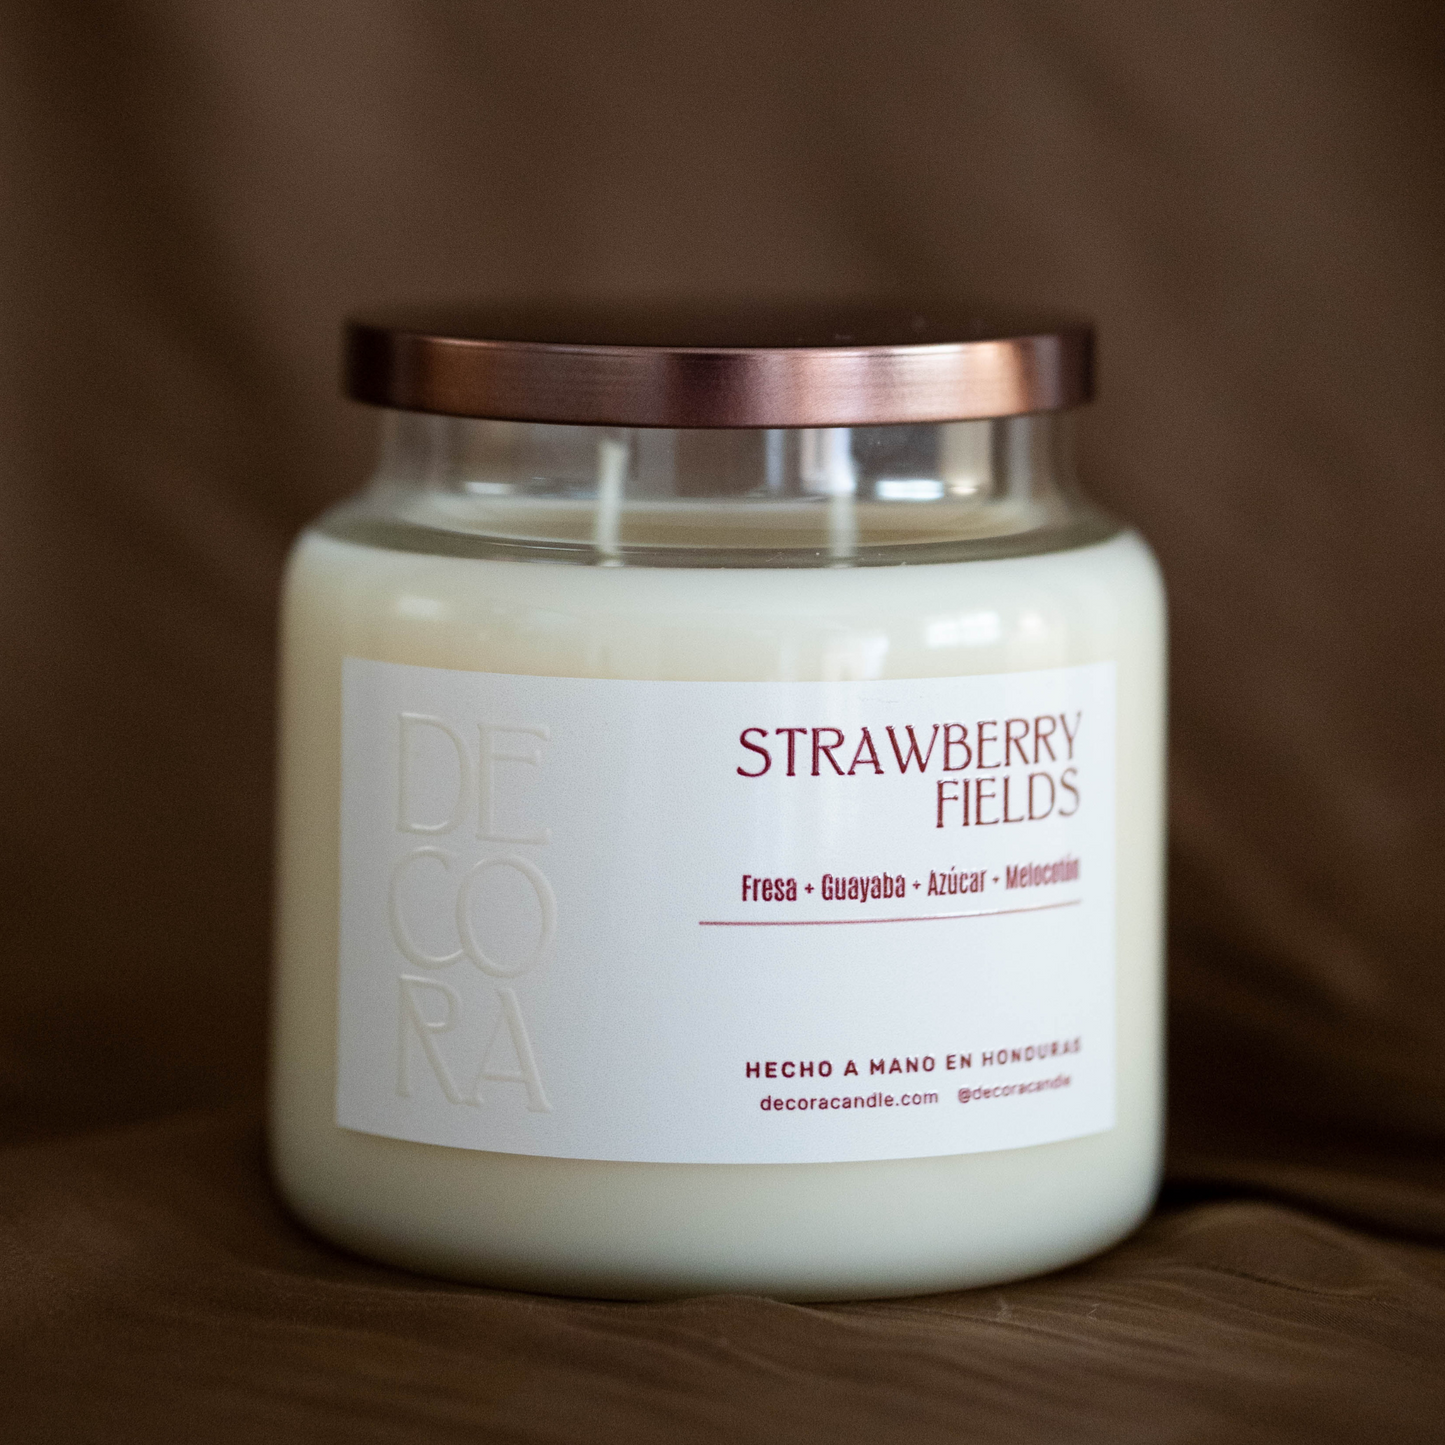 Strawberry Fields - Apothecary Candle 16 oz